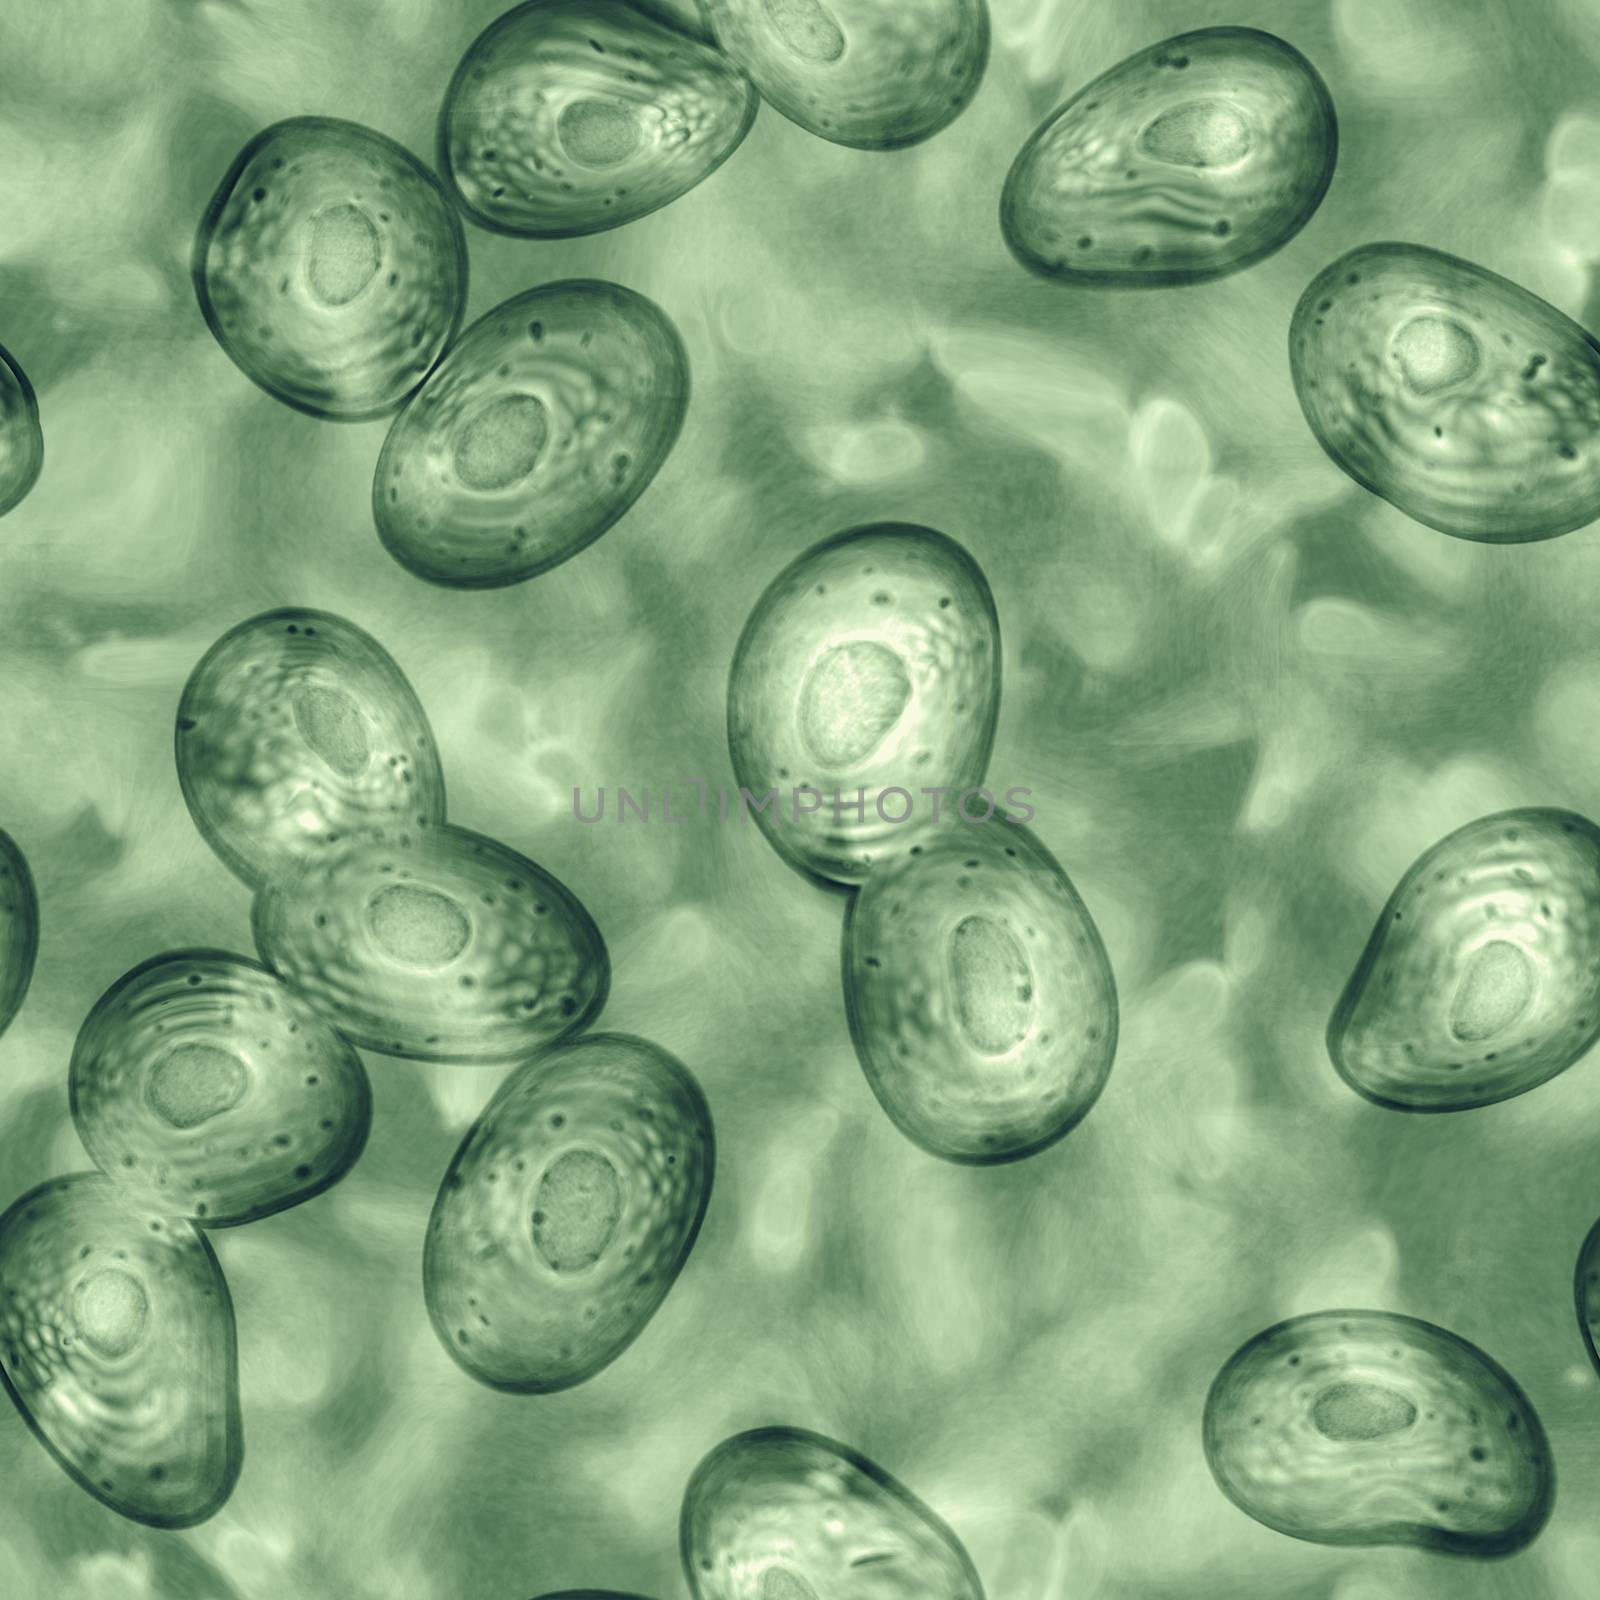 An illustration of a bacteria and germs seamless texture